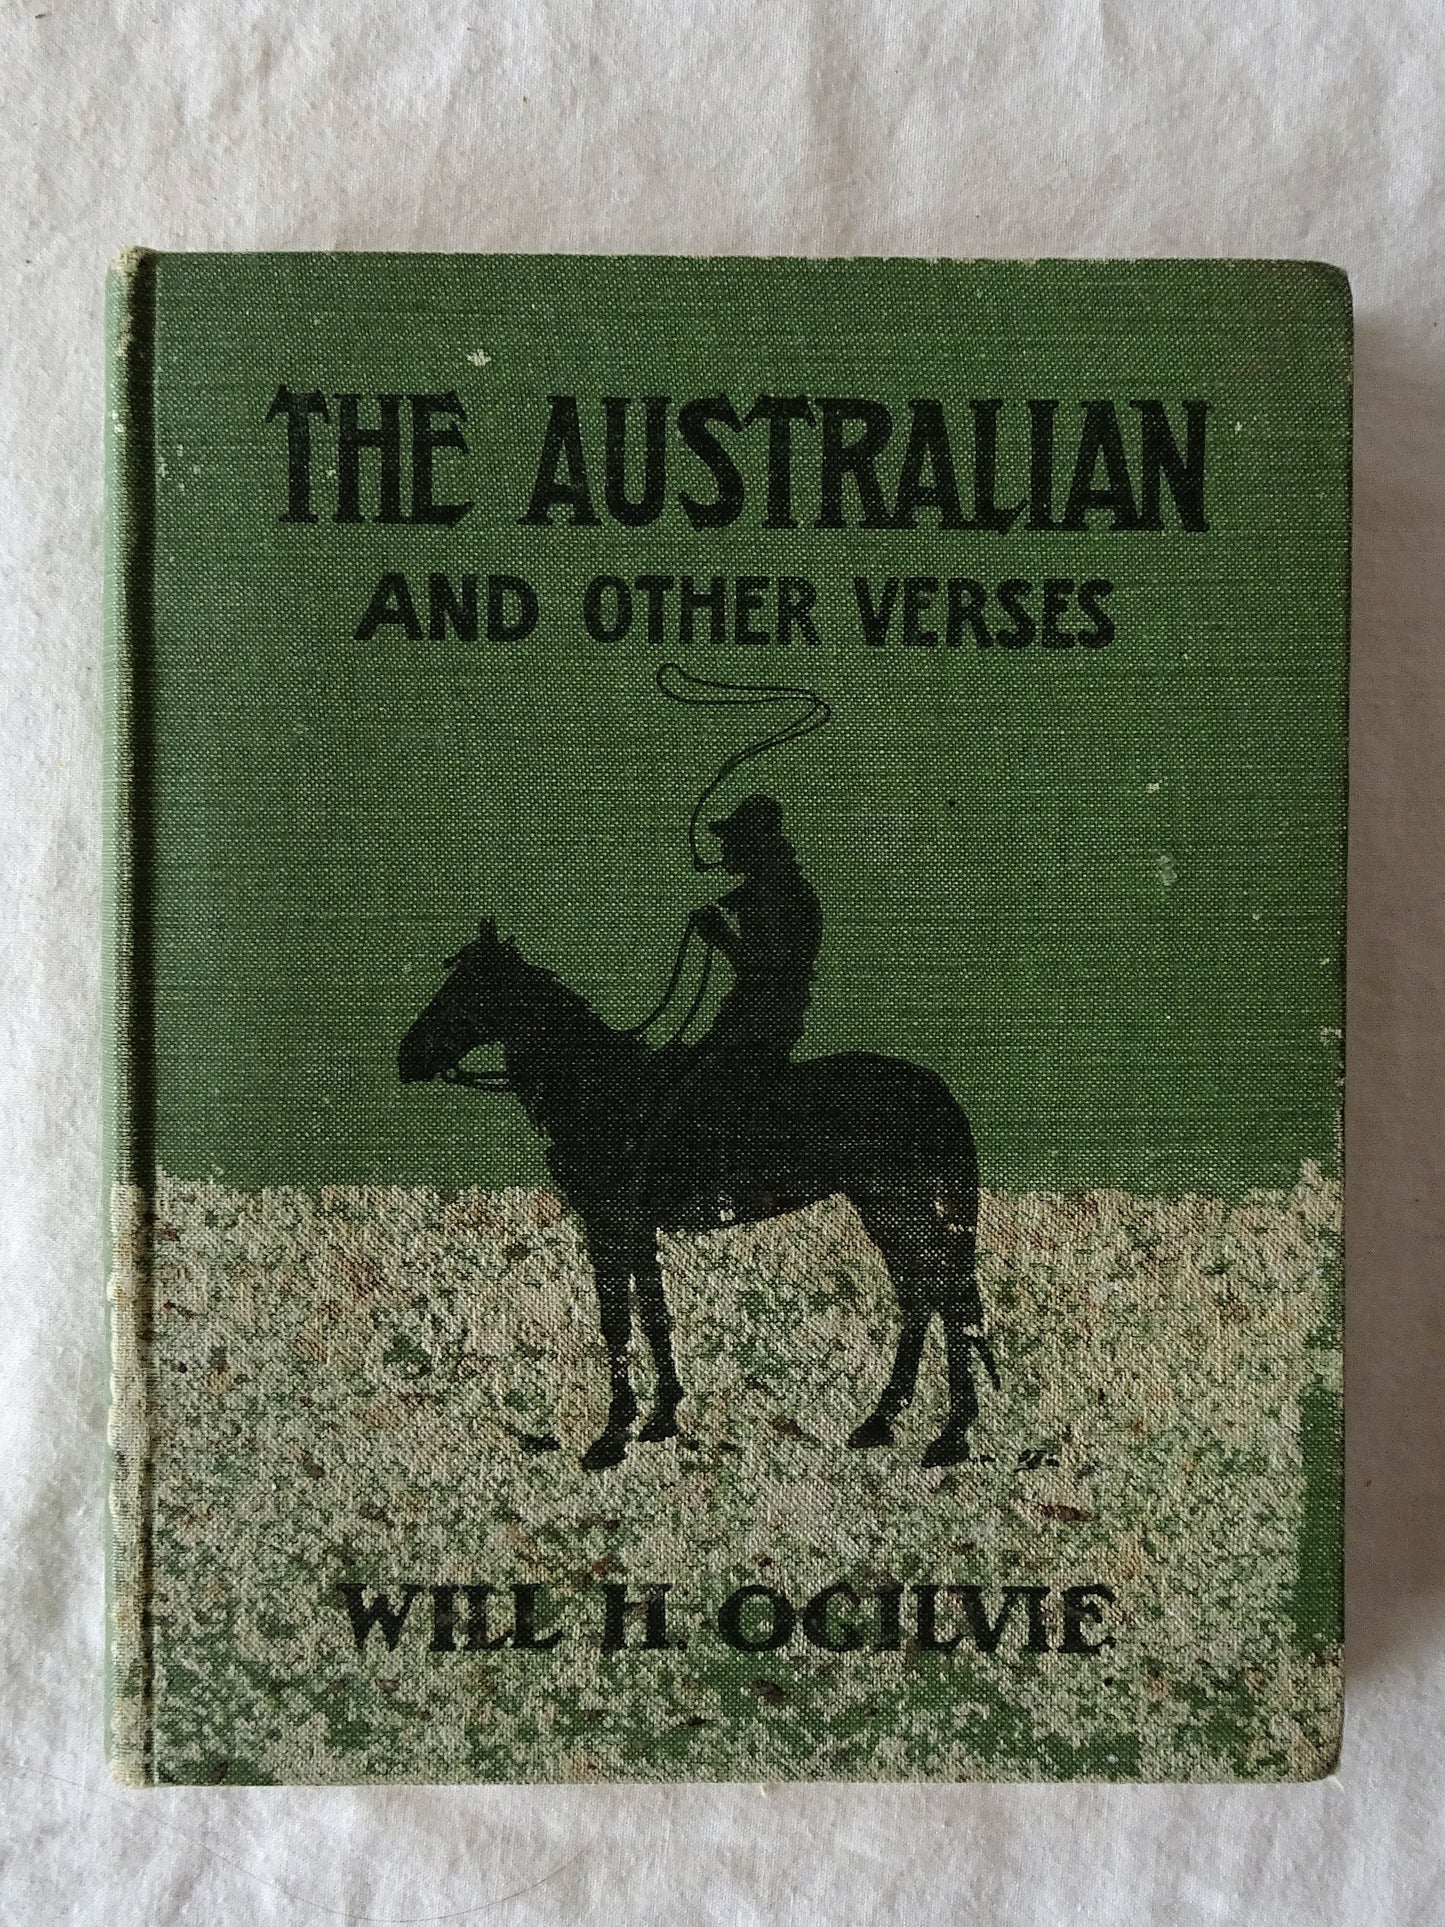 The Australian And Other Verses by Will H. Ogilvie